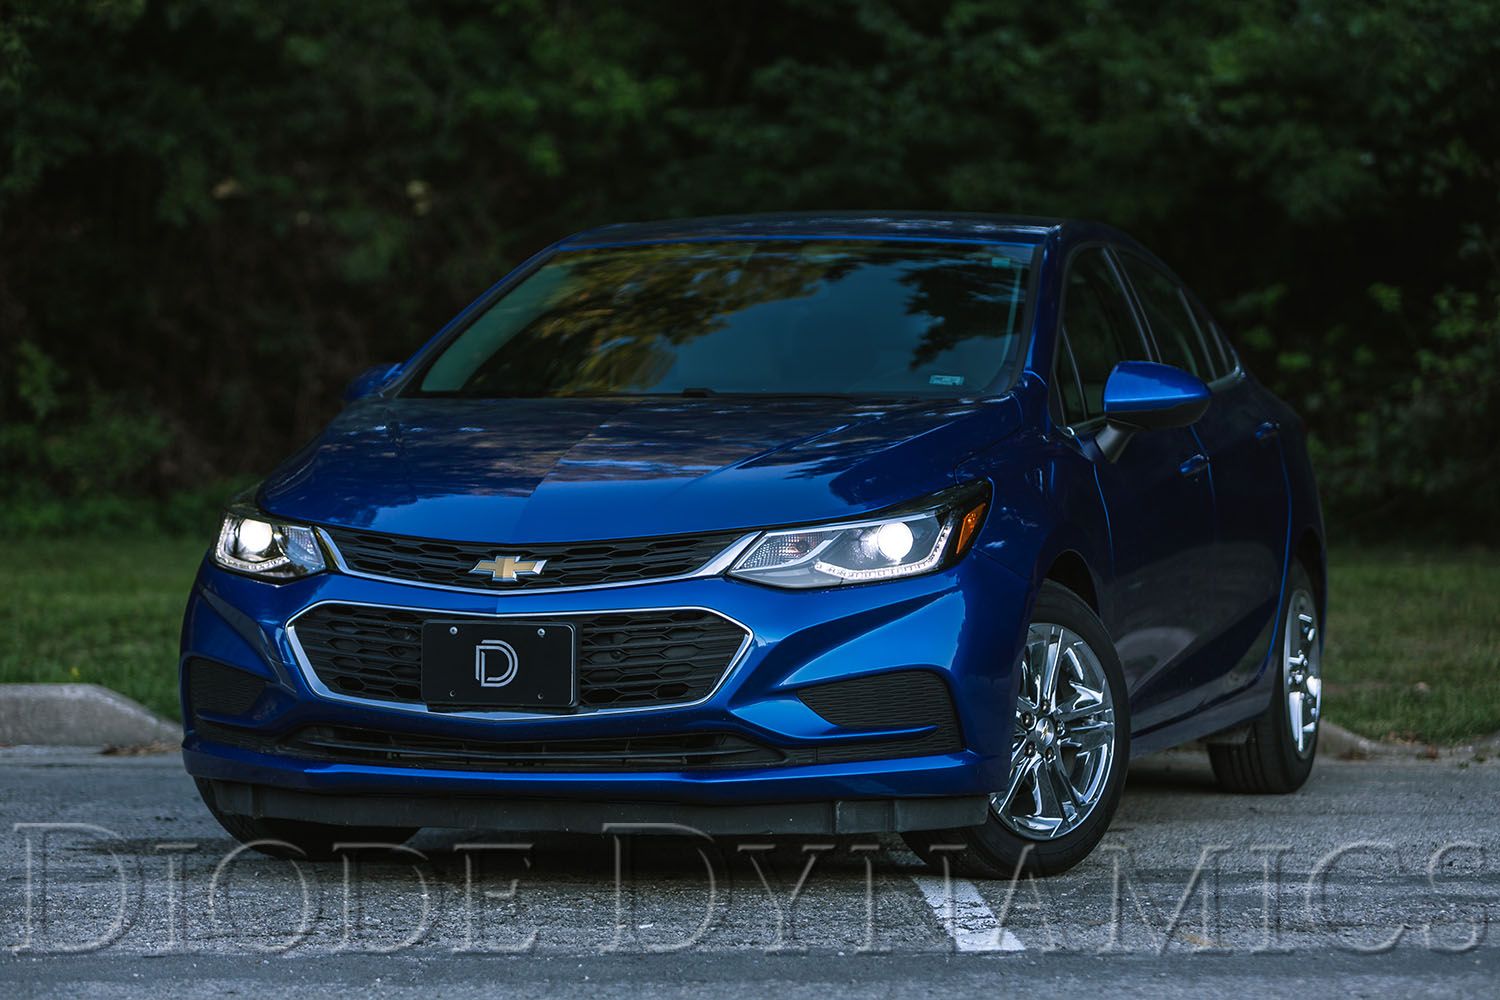 Top LED Lighting Upgrades for the 2011-2019 Chevrolet Cruze